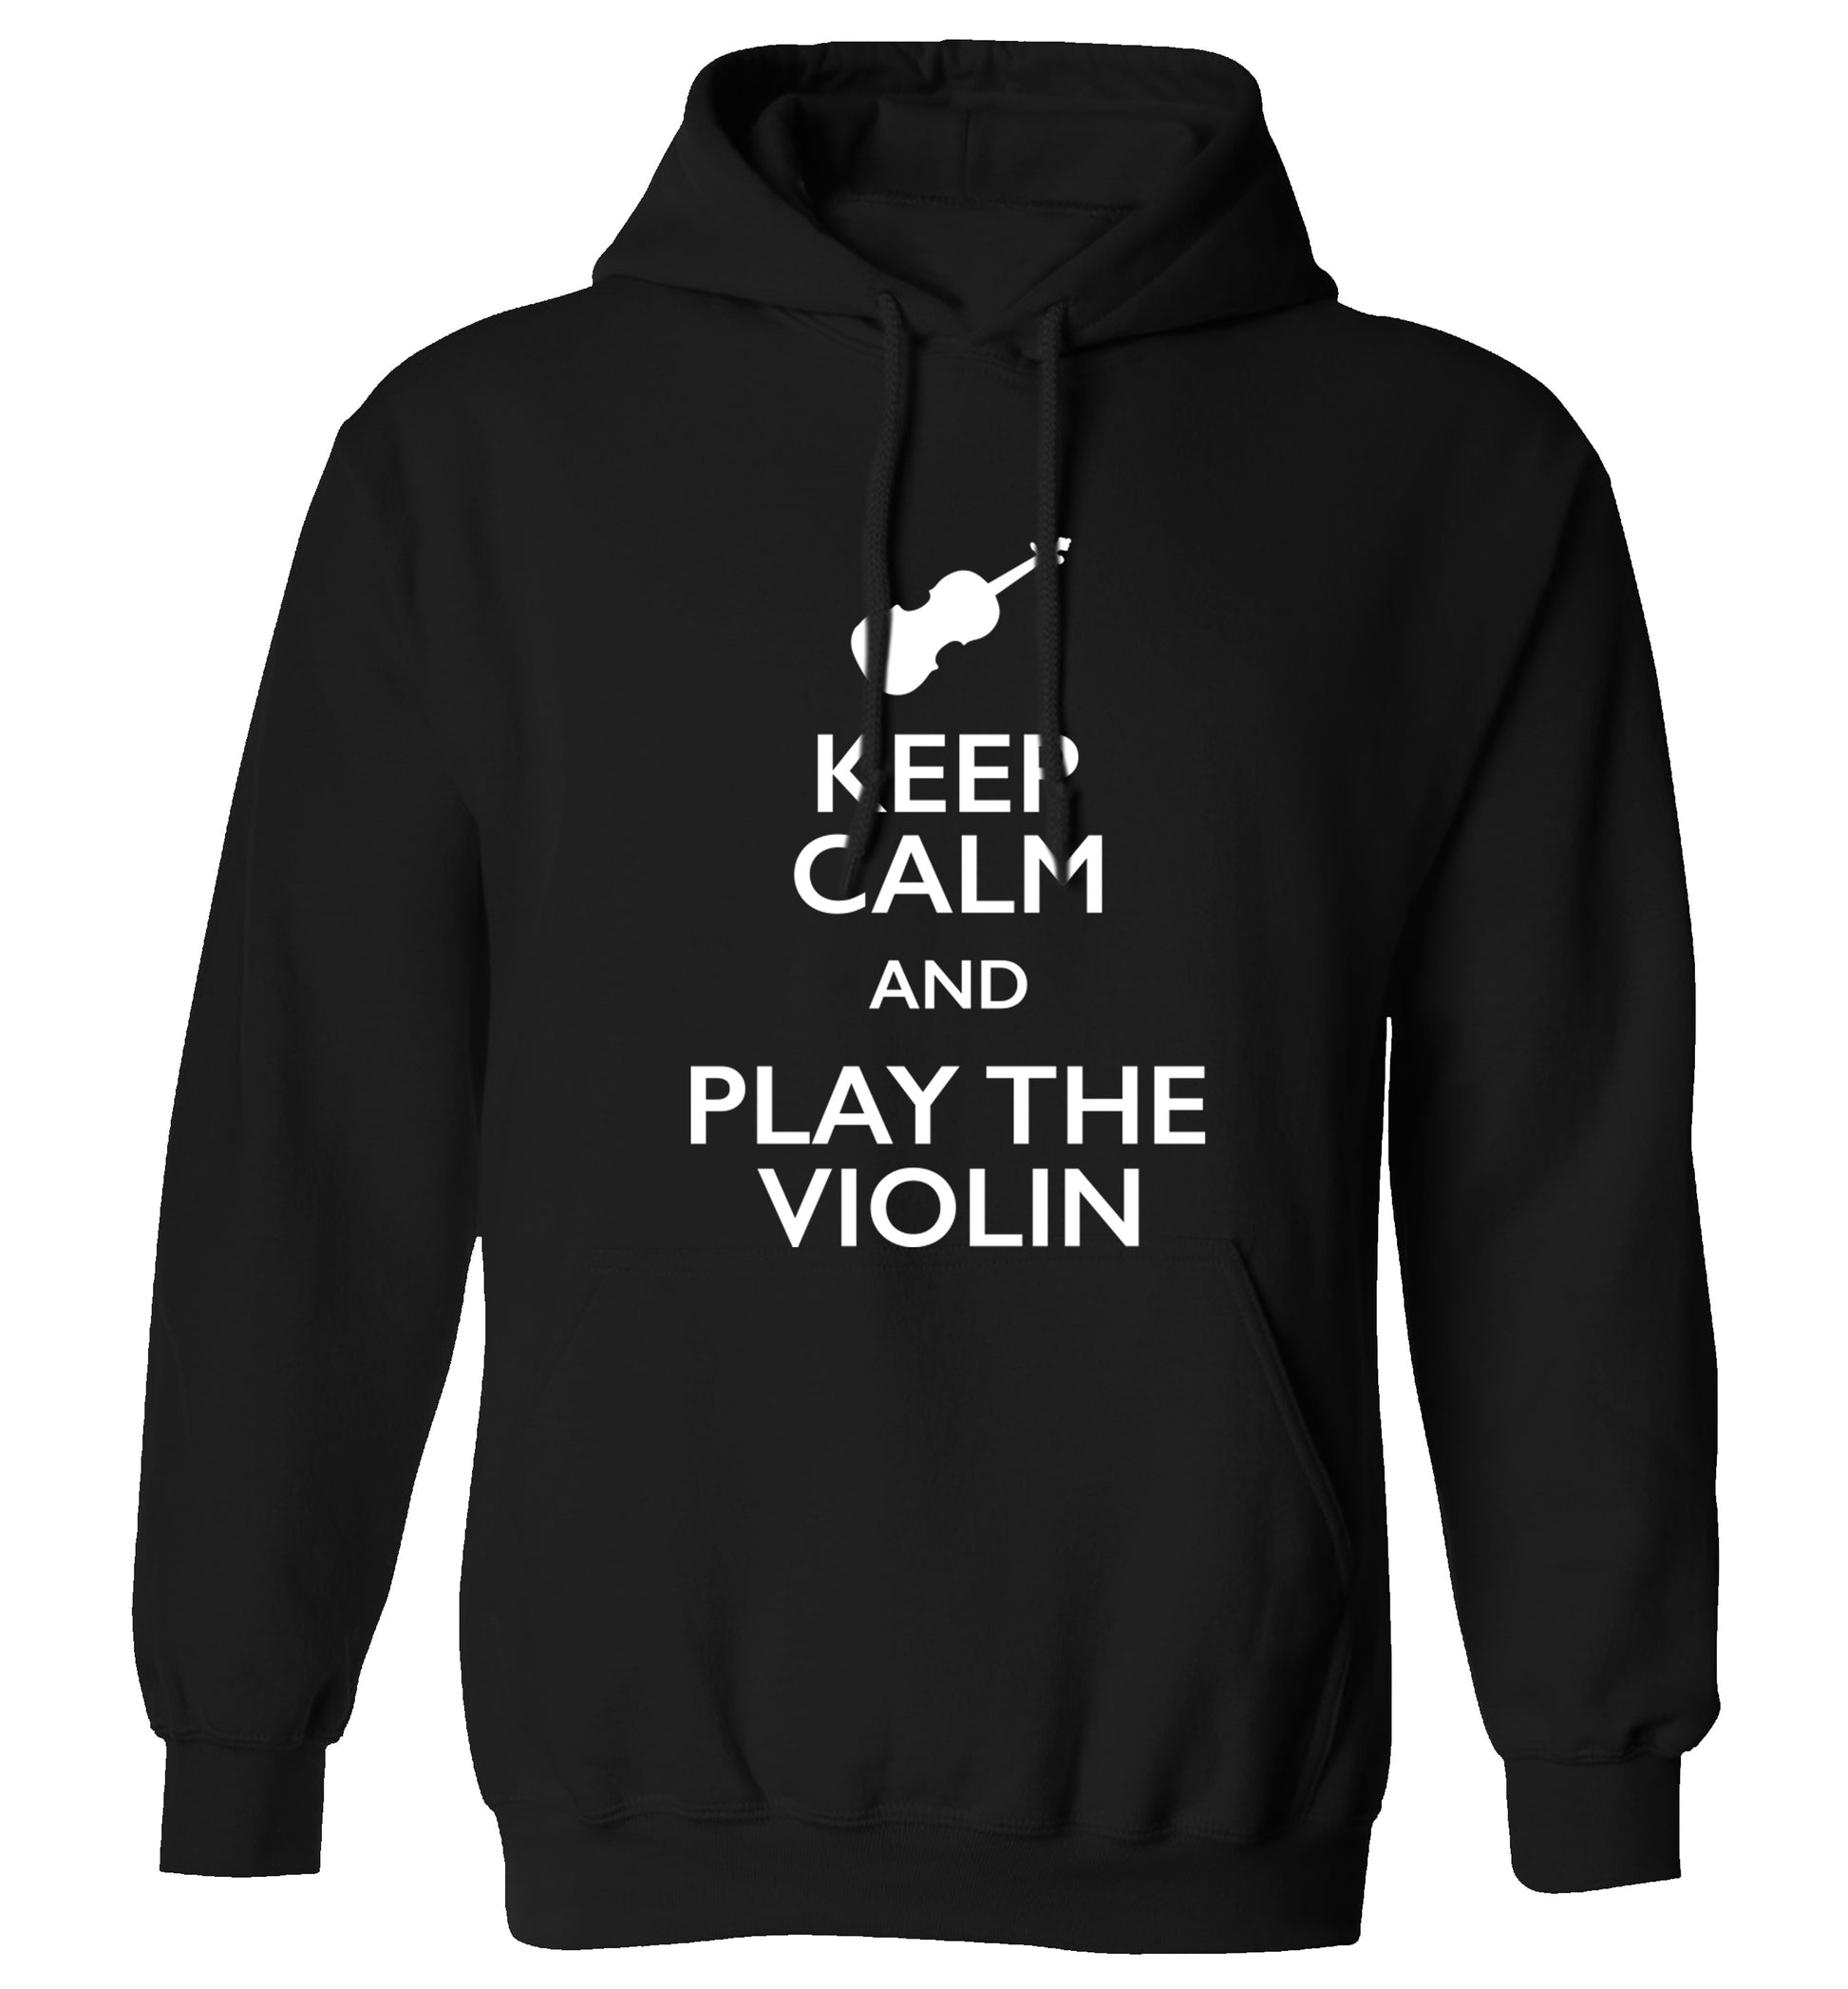 Keep calm and play the violin adults unisex black hoodie 2XL